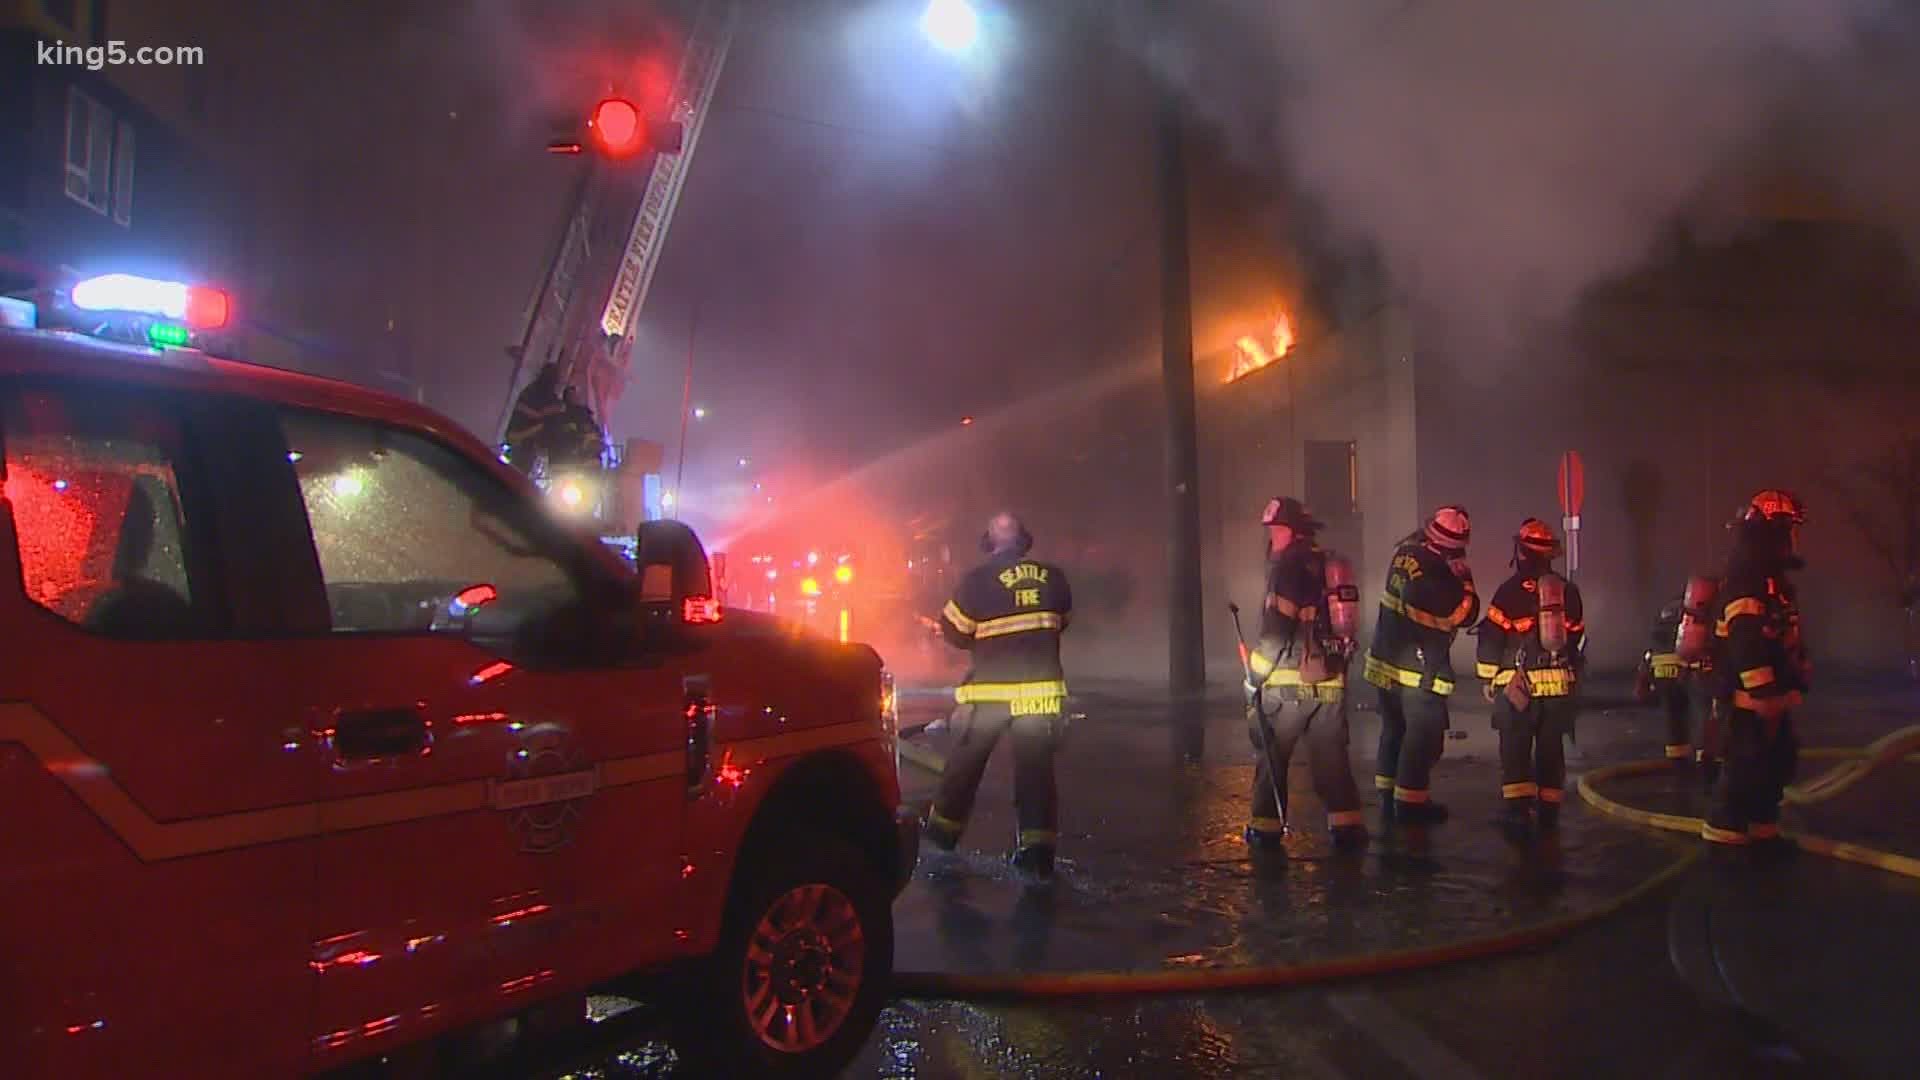 A fire broke out late Monday night at Lake City Center, destroying at least three businesses. Seattle Fire crews battled the two-alarm blaze past midnight.